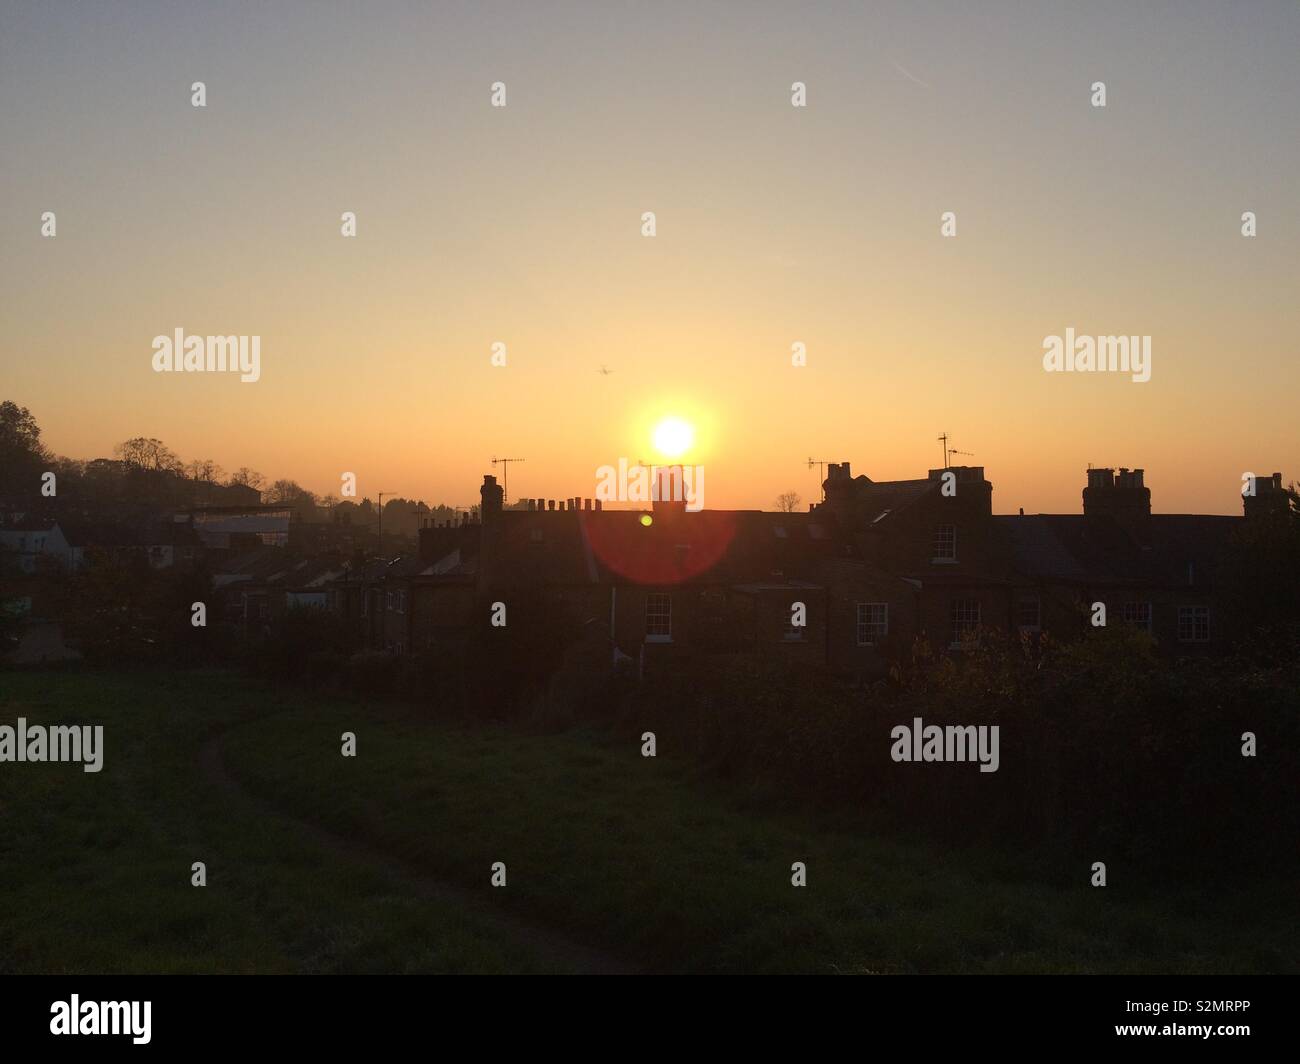 Sunset over houses in Harrow, London during the winter. Stock Photo